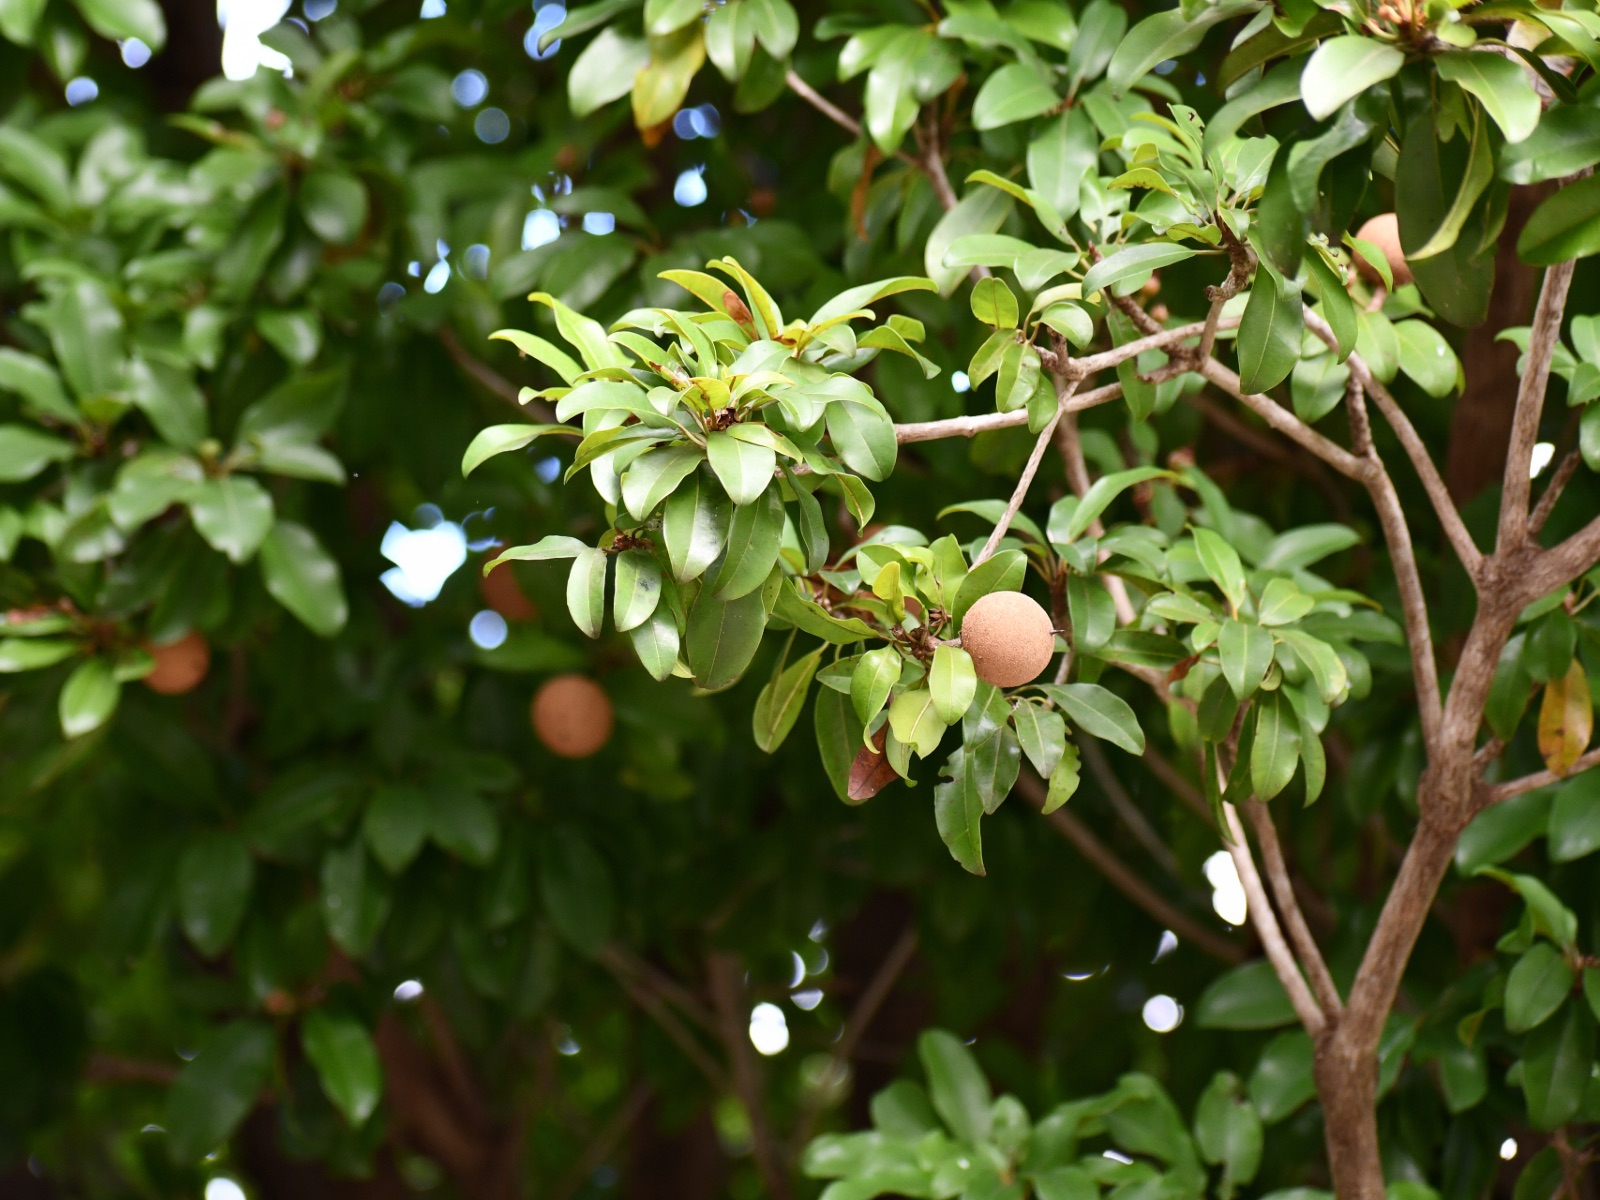 Fruit growing on the trees.